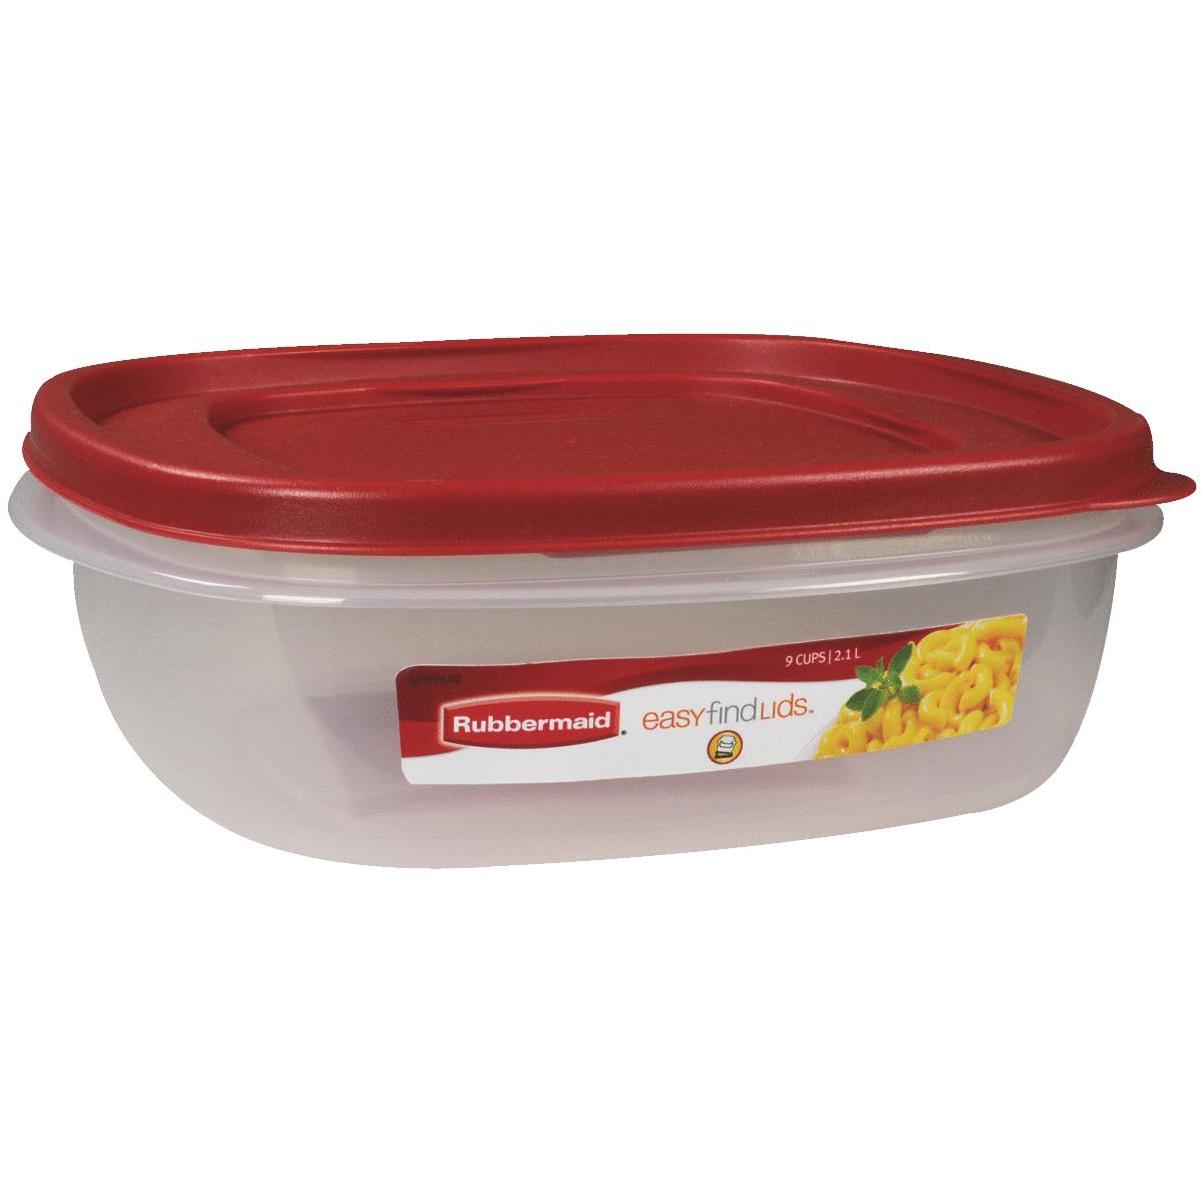 Save on Rubbermaid TakeAlongs Containers & Lids Square 2.9 Cups